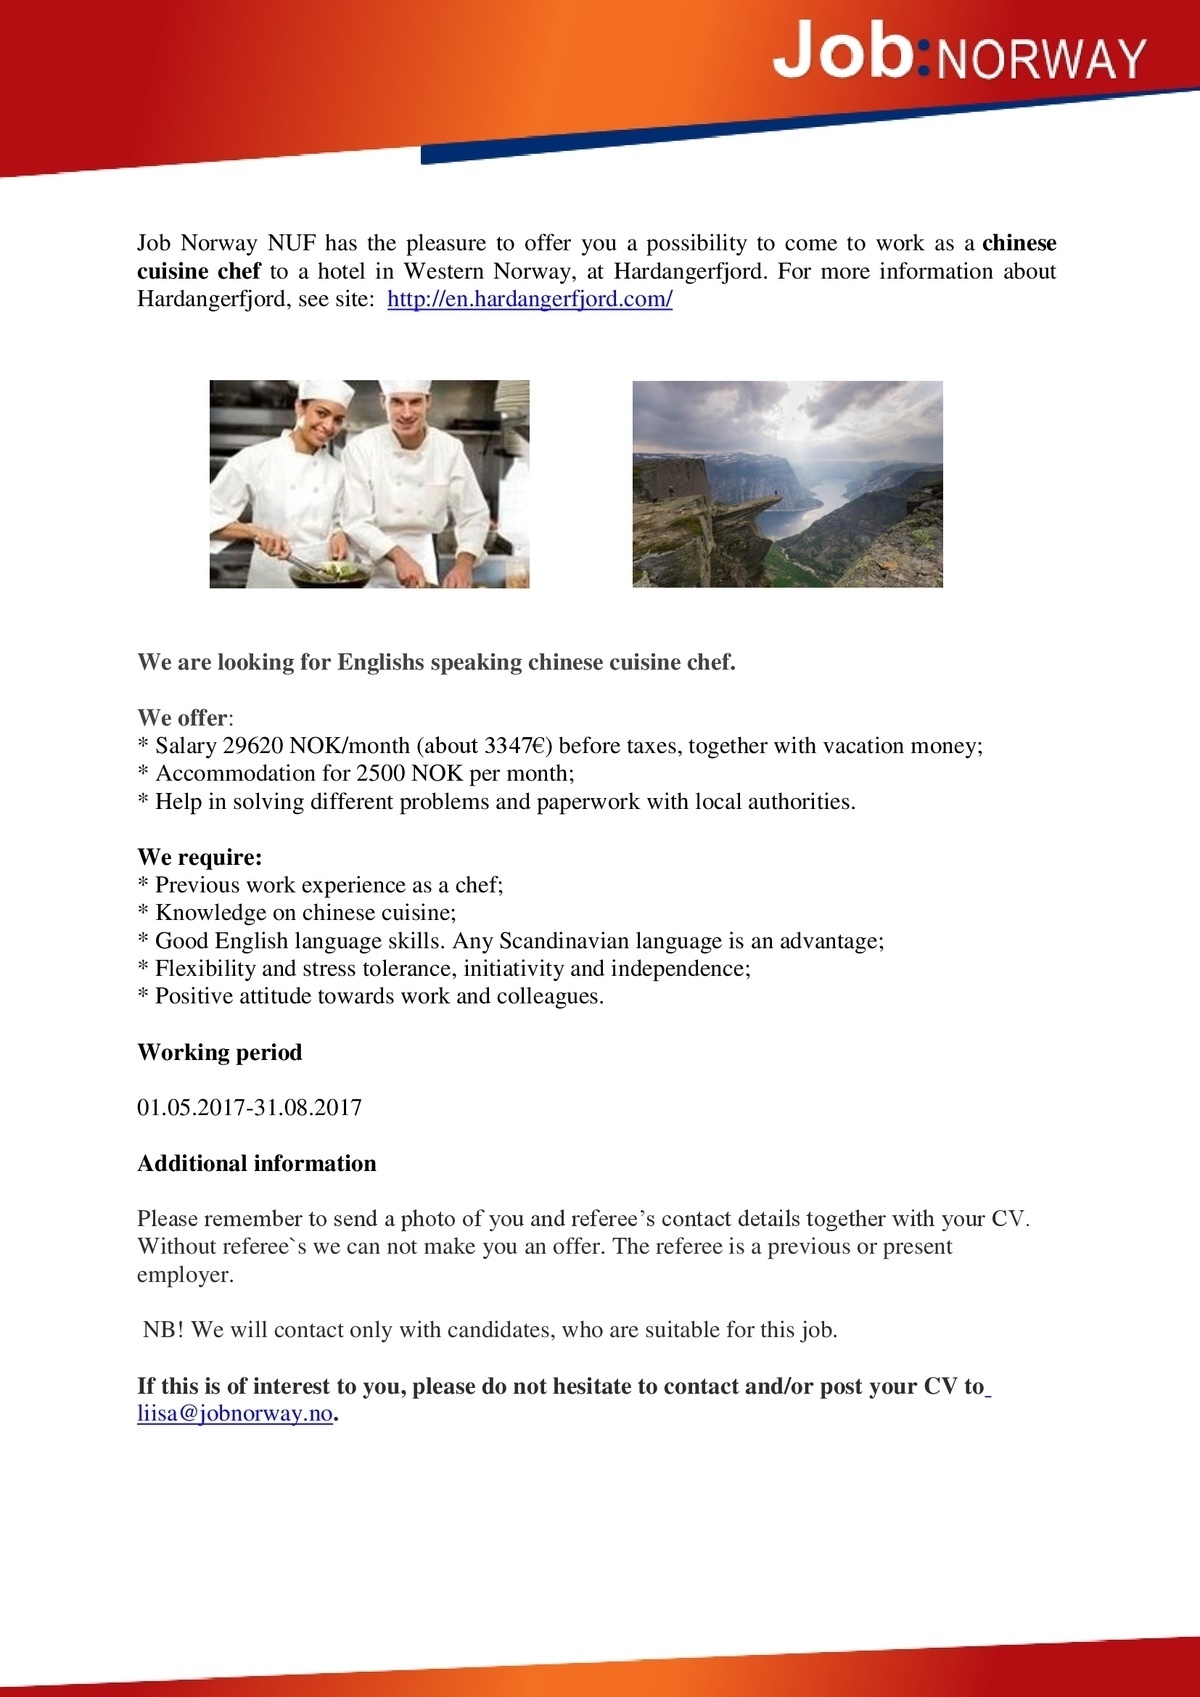 Job Norway NUF Chef to Chinese restaurant in Norway